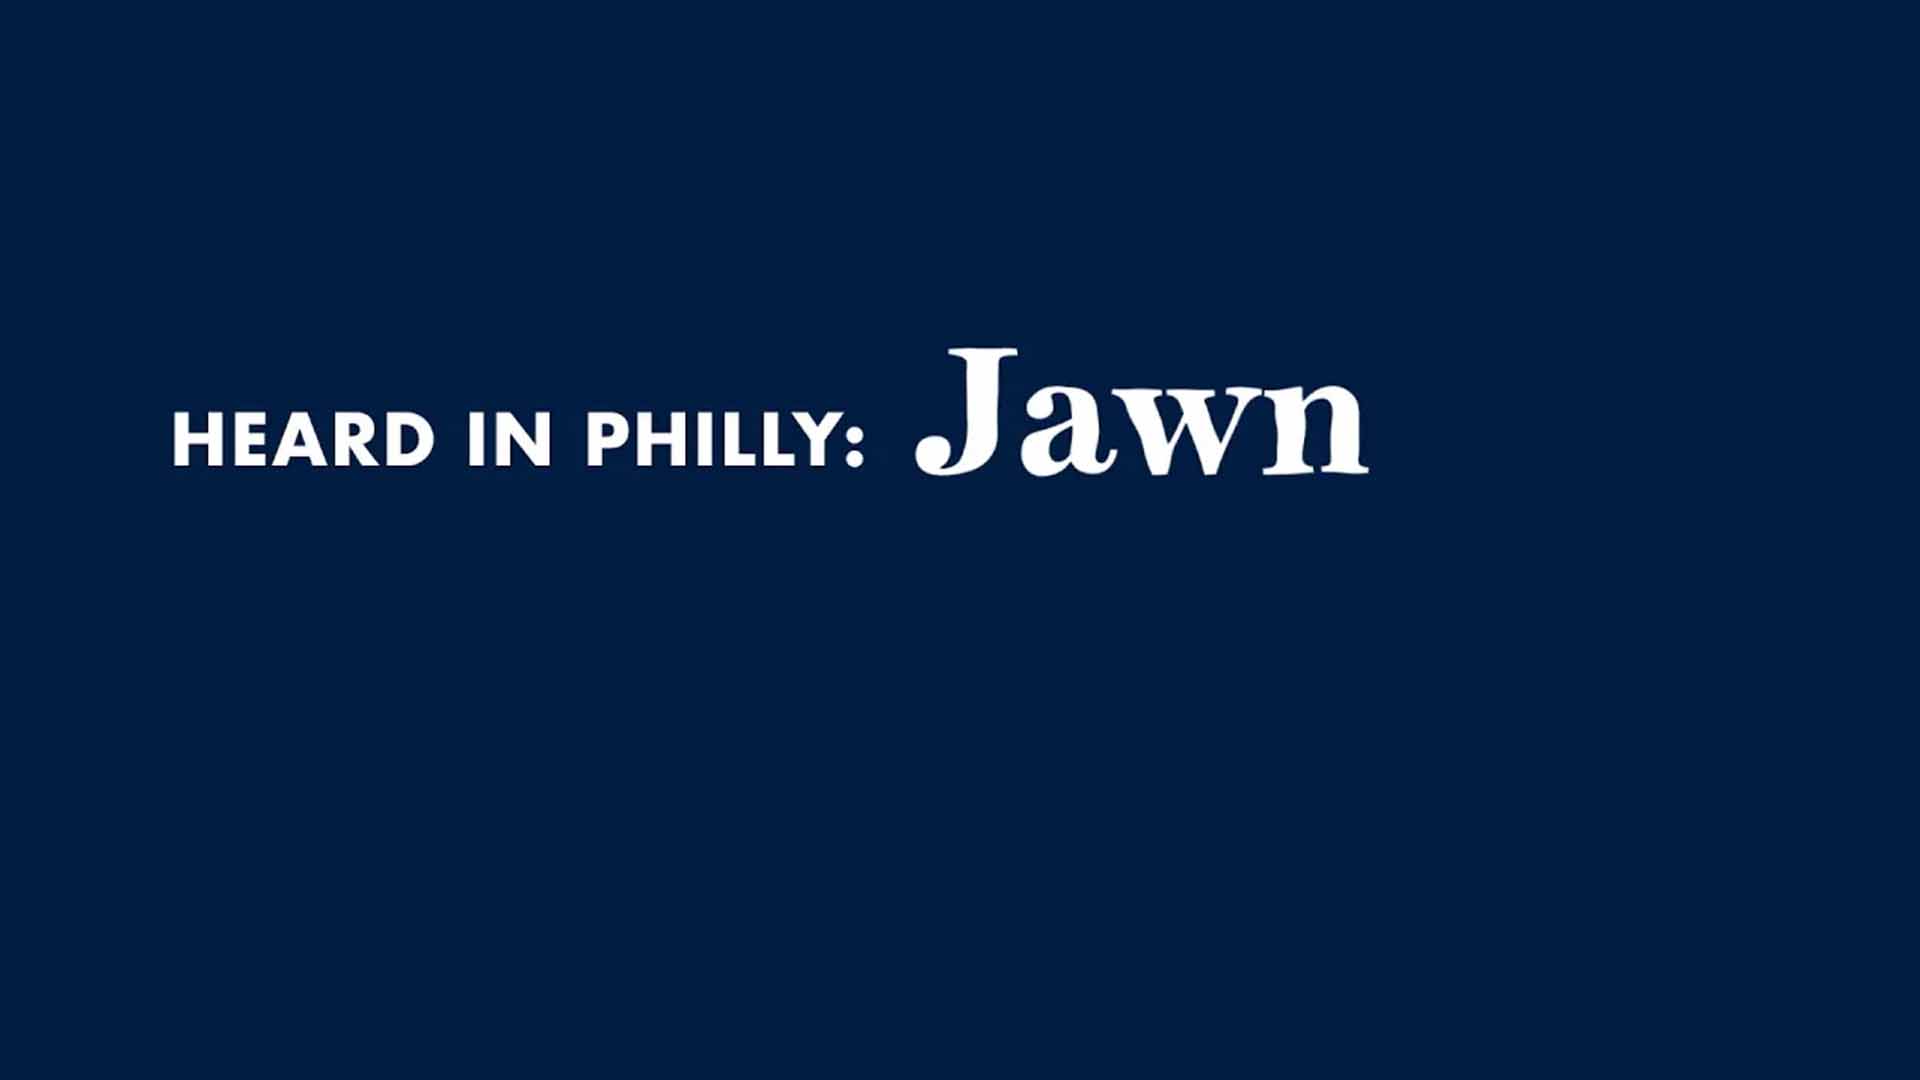 Heard in Philly: Jawn